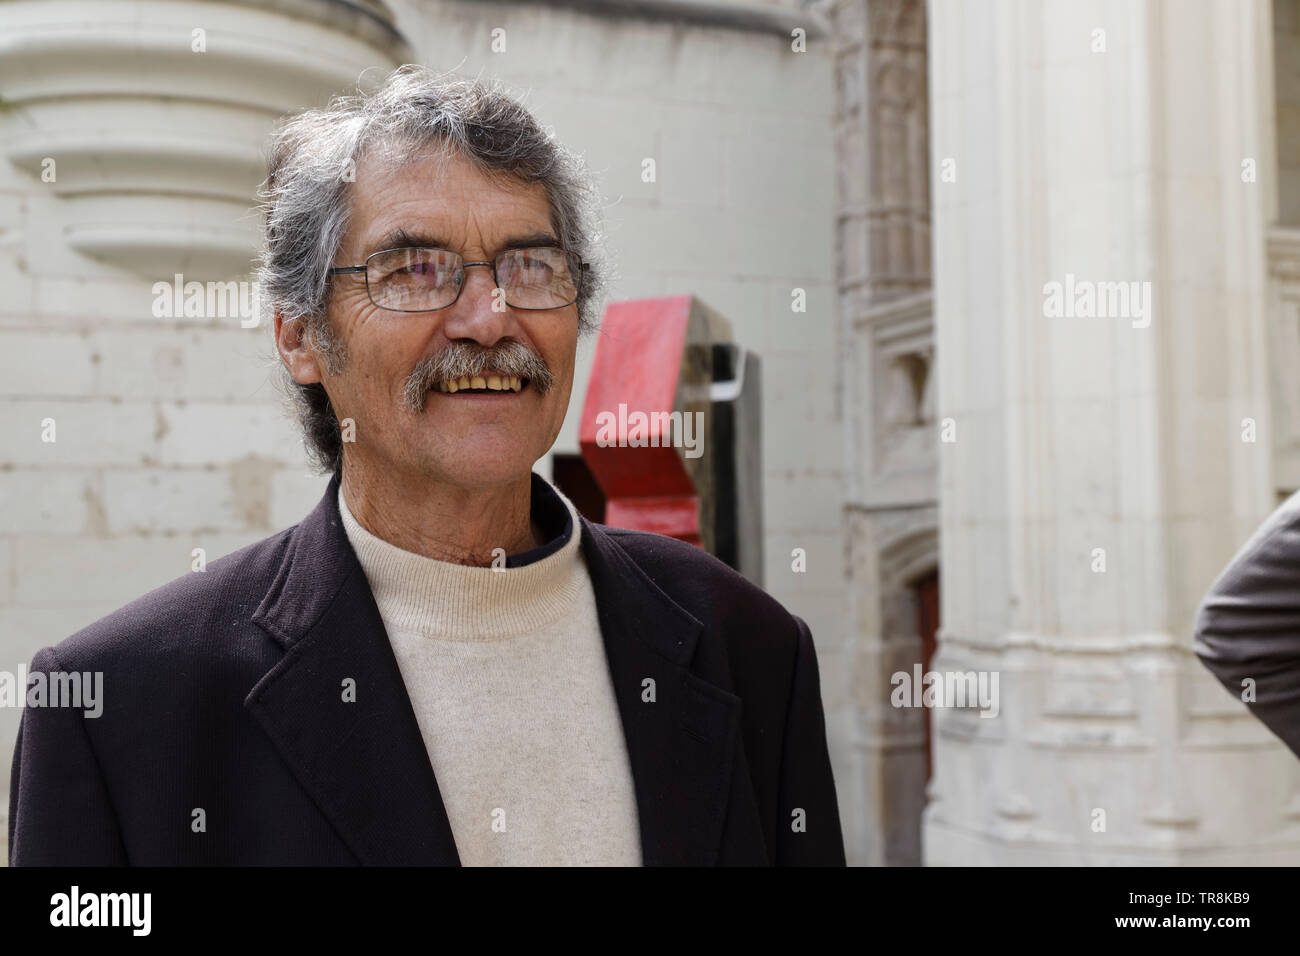 Tours, France.24th May,2019.Artist attends at Exhibition Re-naissance(s) of the Capazza Gallery.©:Veronique Phitoussi/Alamy Stock Photo Stock Photo